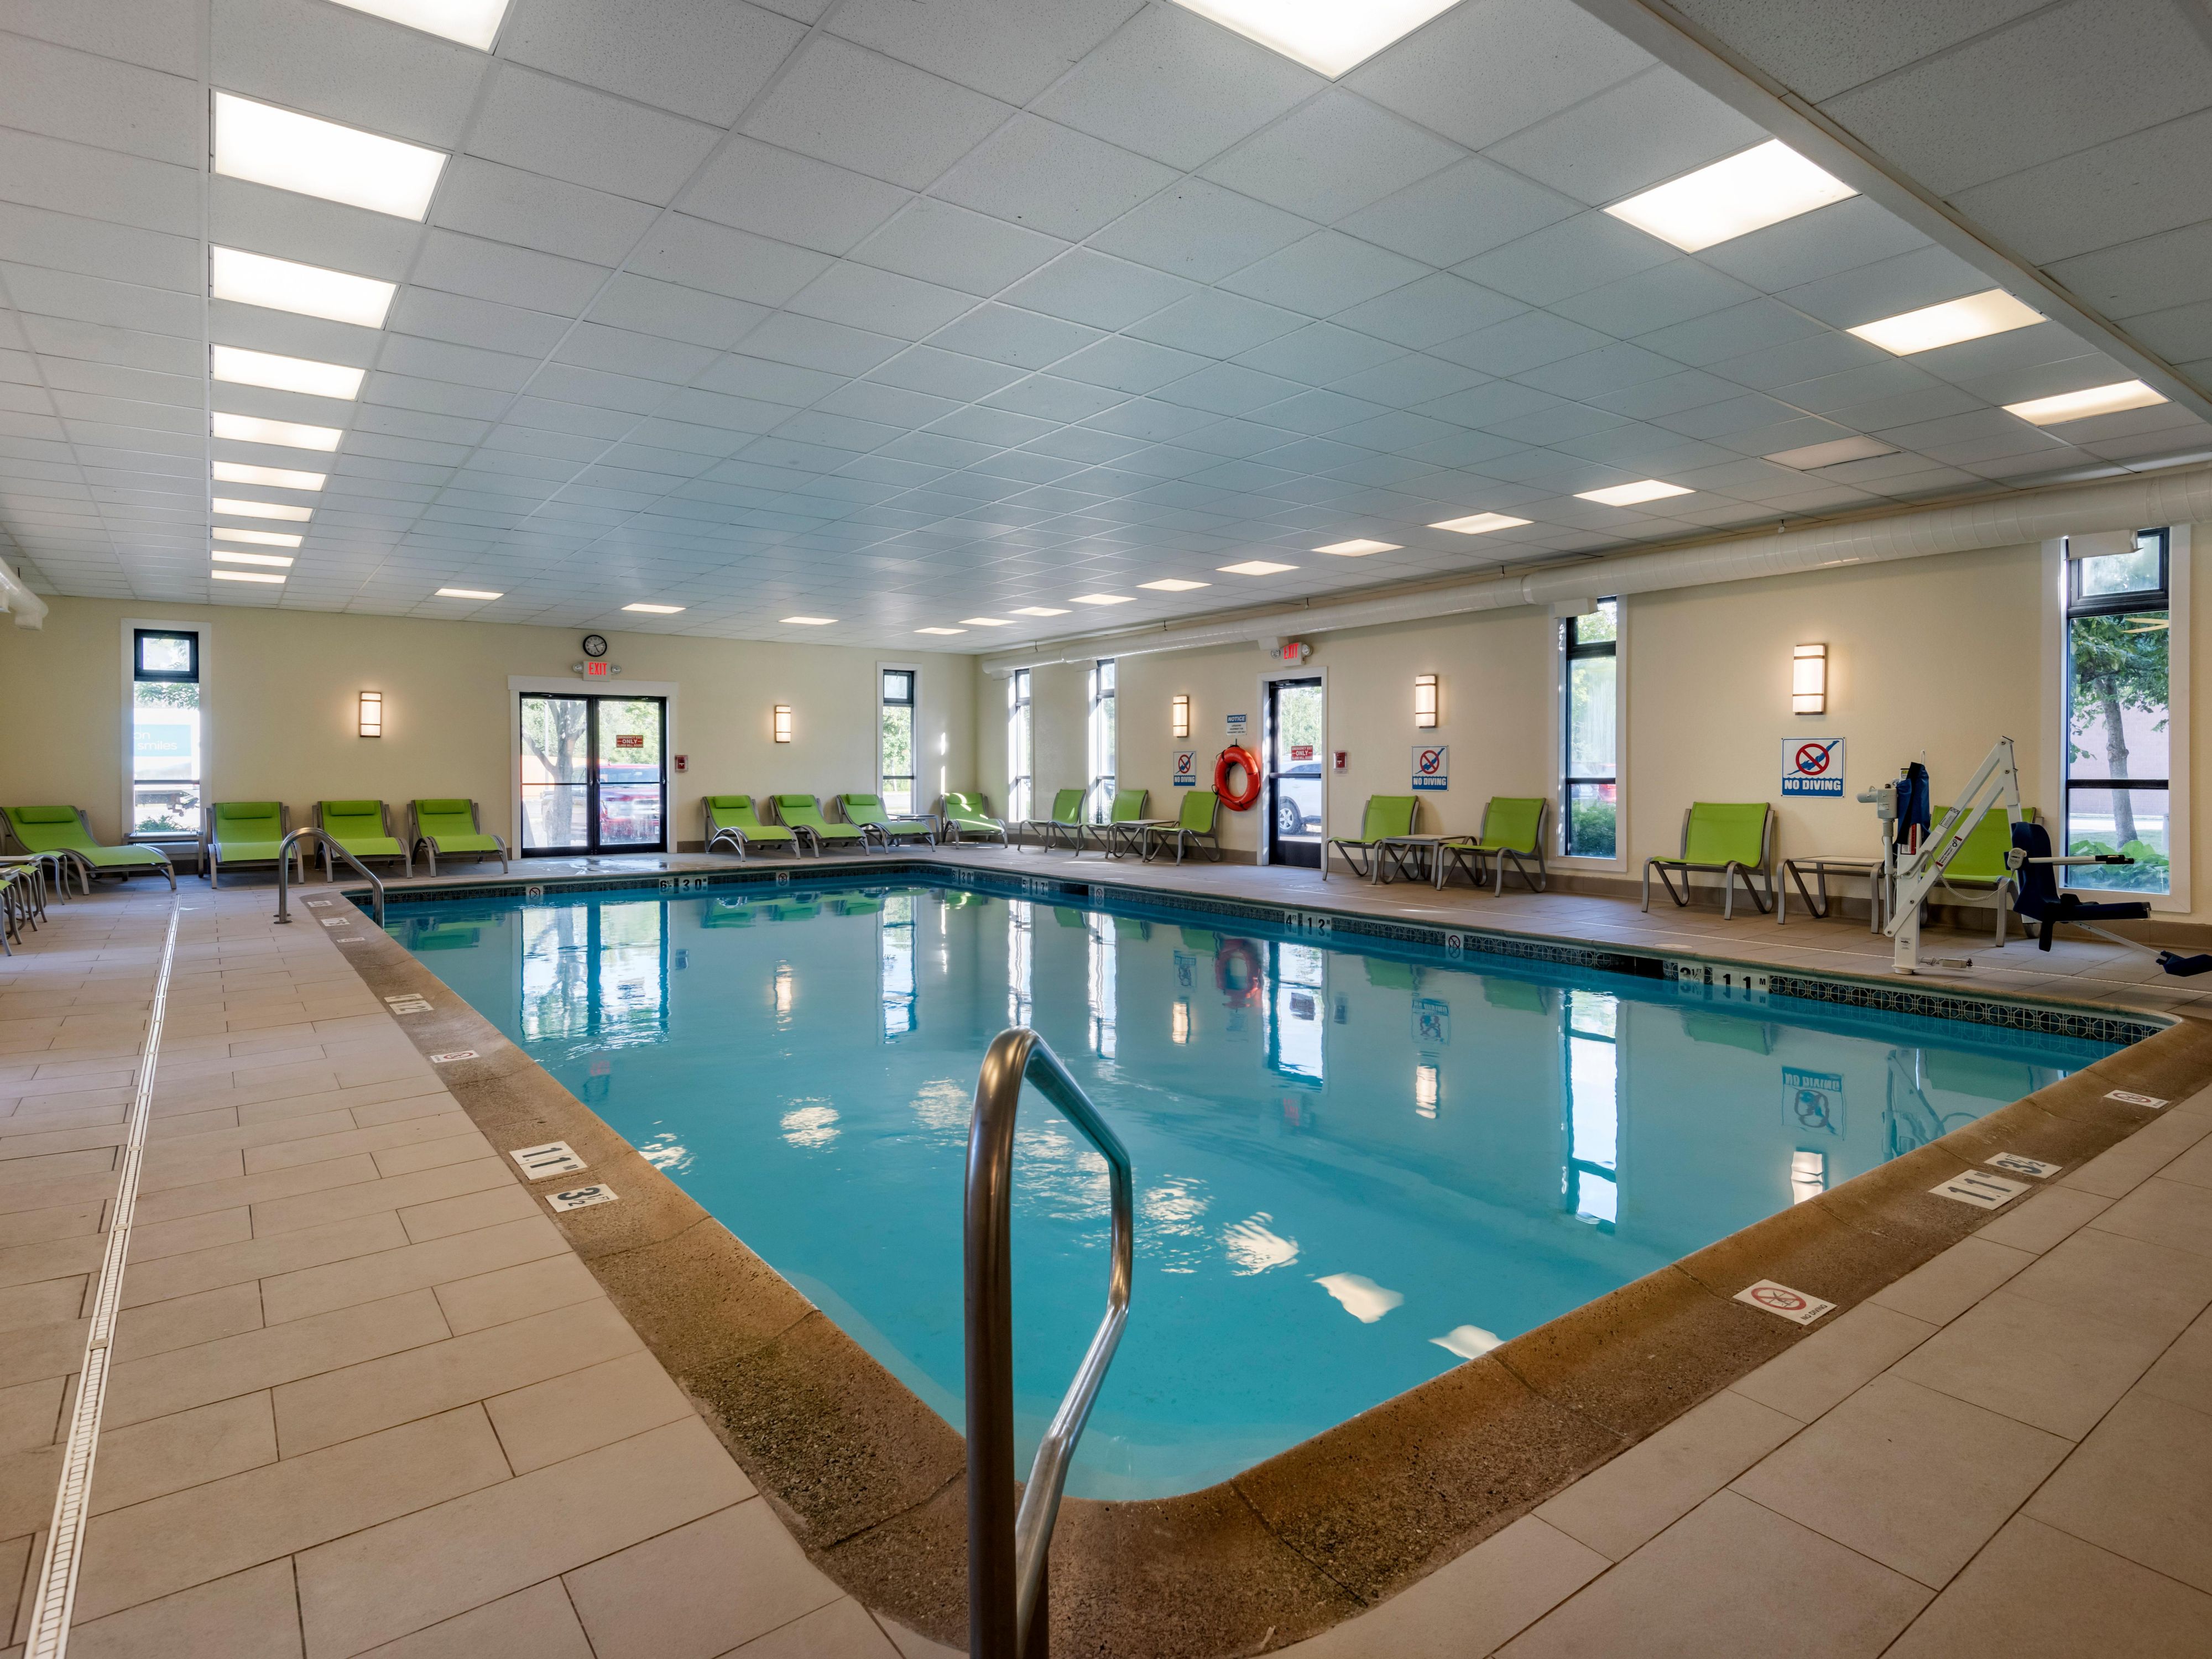 Spacious indoor heated pool open daily from 6AM to 10PM.  Come and relax or exercise in our indoor pool.  Changing room, lockers and plenty of seating to ensure you enjoy your time in our pool area.